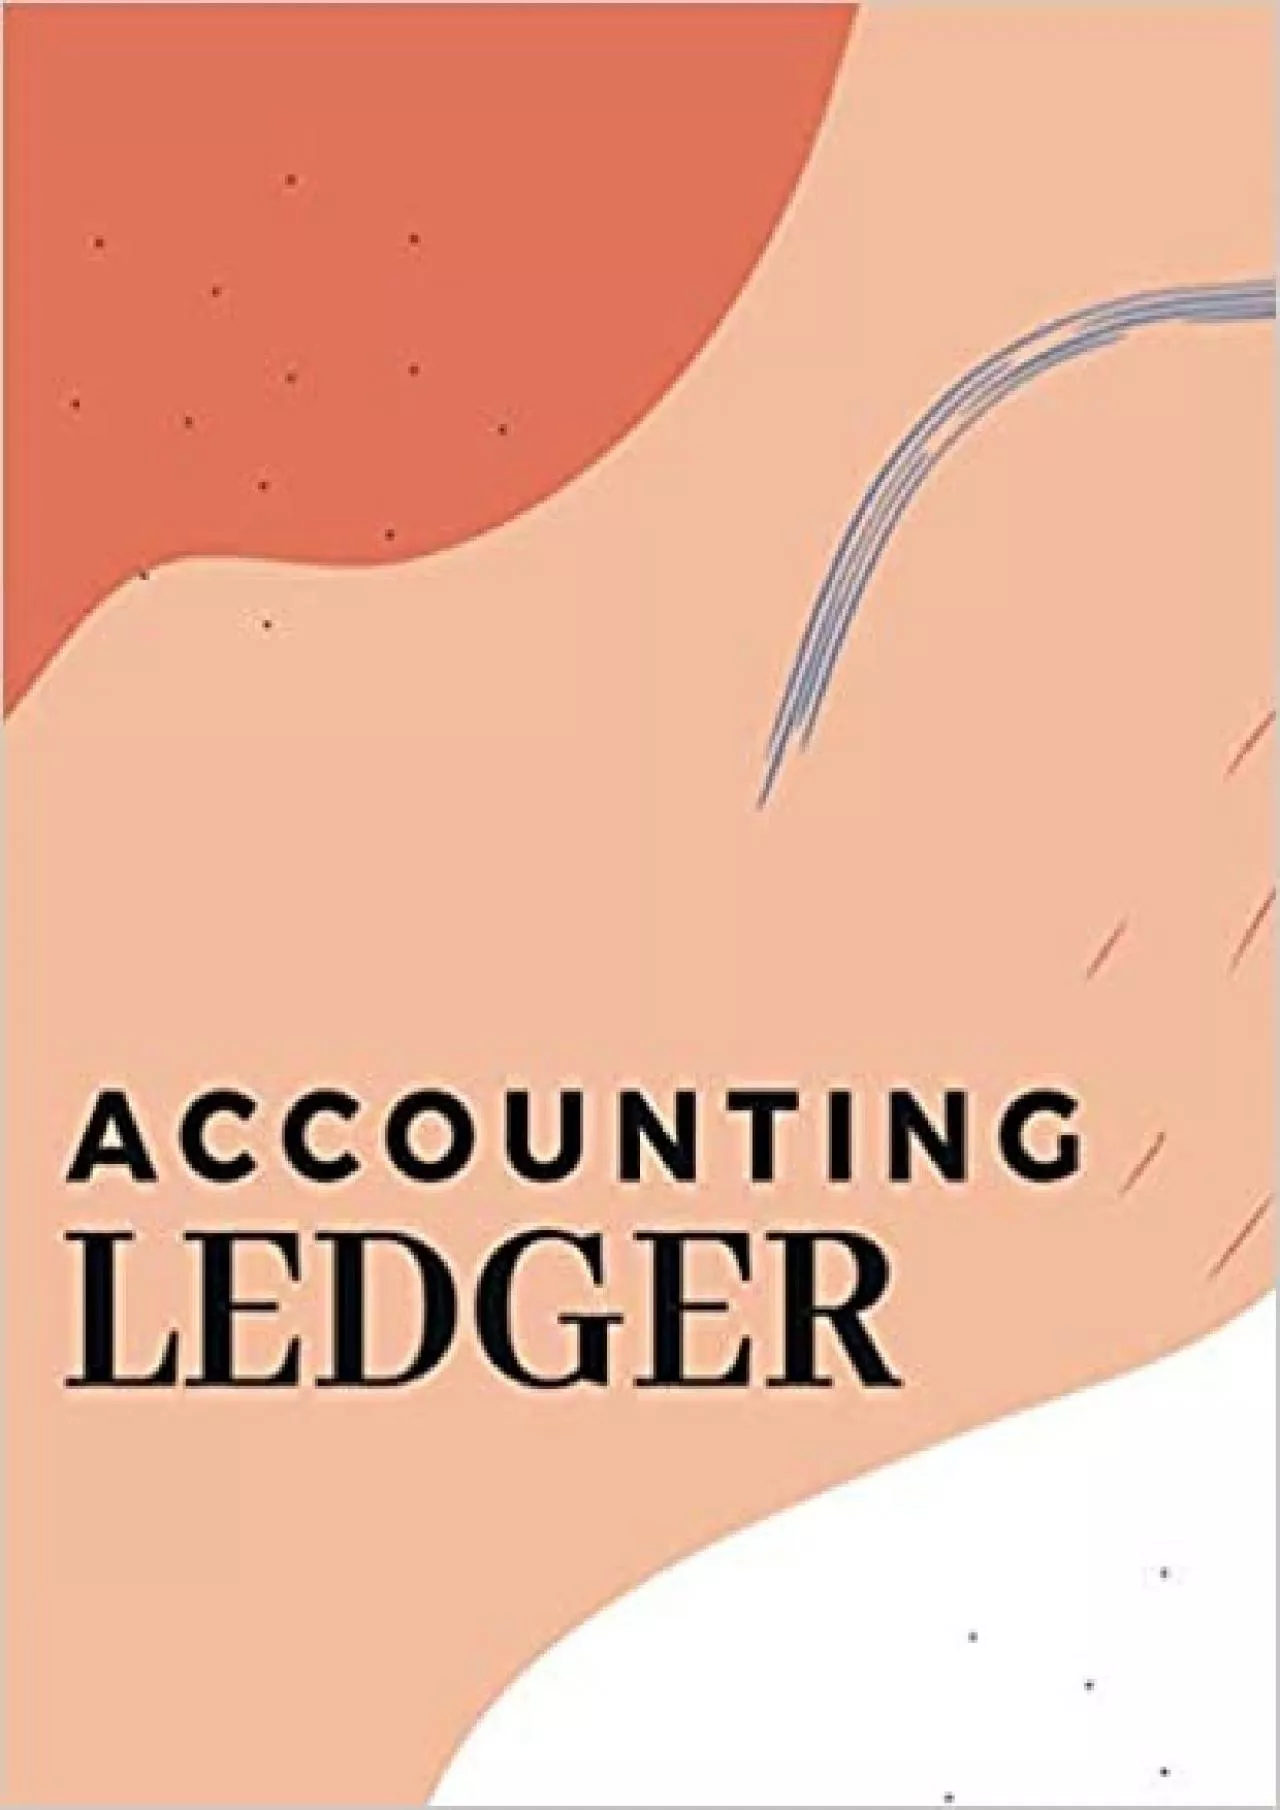 Accounting Ledger Orange-White-Blue Abstraction For Small Business | Account Notebook